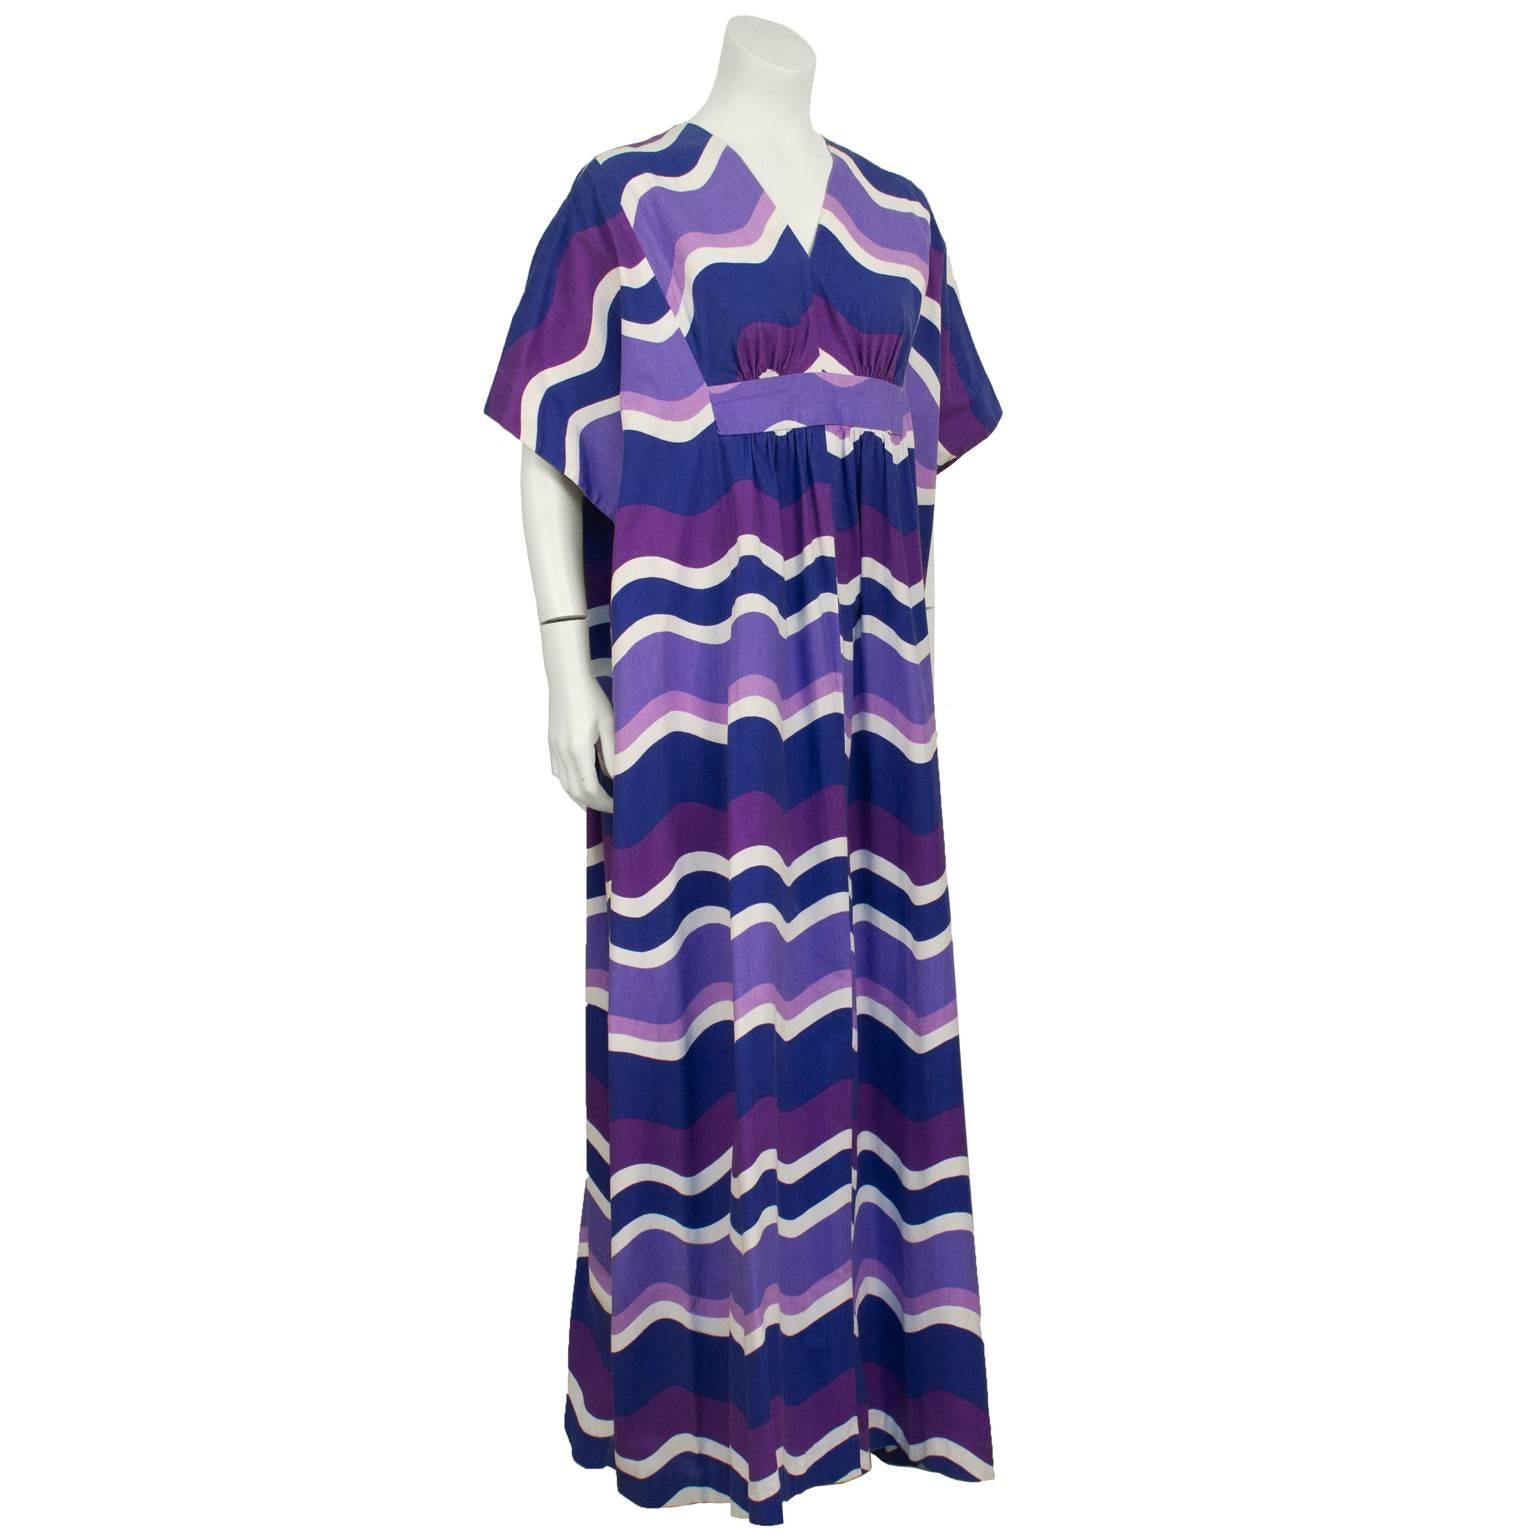 Anonymous cotton 1970's bohemian kaftan with multi shade purple and white wave style print. The dress features a v neckline and slightly ruched bust with a banded hidden empire style waistband that fastens underneath the dress and around the back